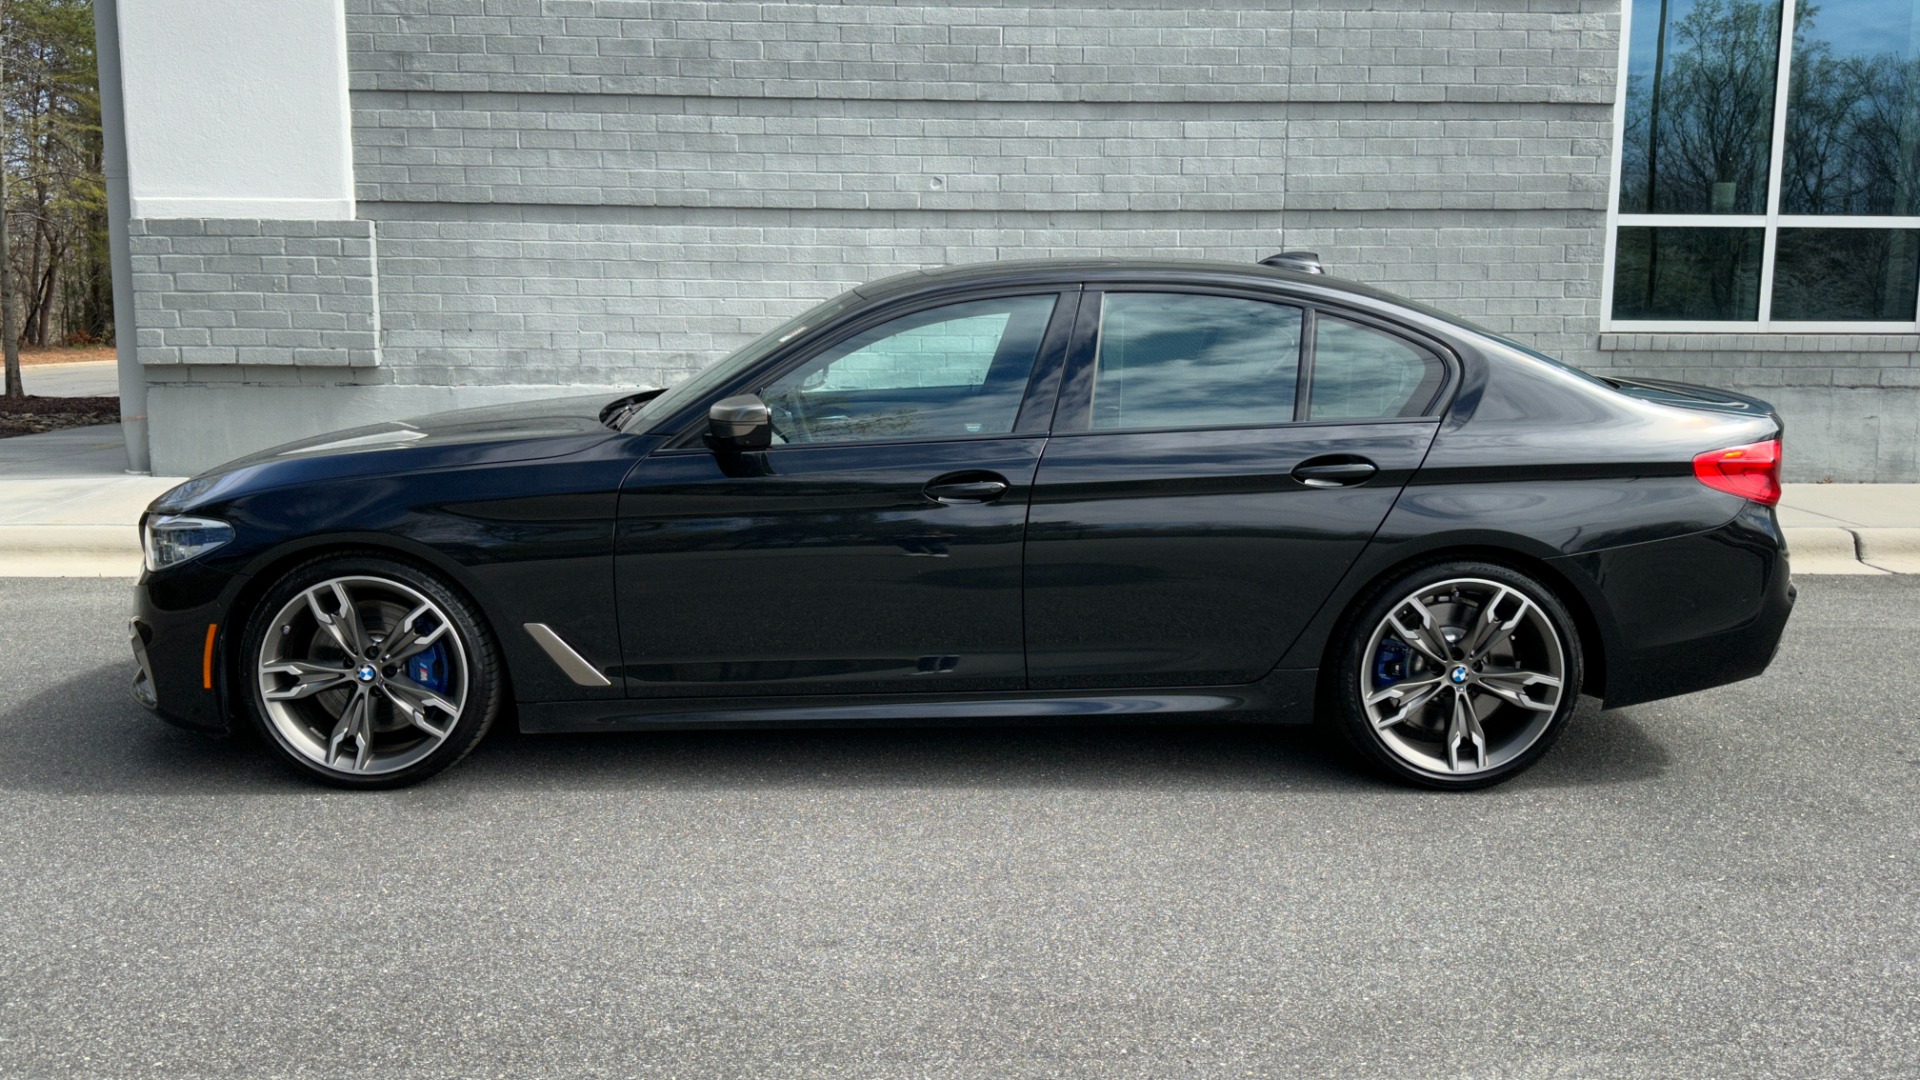 Used 2020 BMW 5 Series M550i xDrive / 20IN WHEELS/ DRIVE ASSIST PLUS / EXECUTIVE PACKAGE / HEATED  for sale $50,495 at Formula Imports in Charlotte NC 28227 3